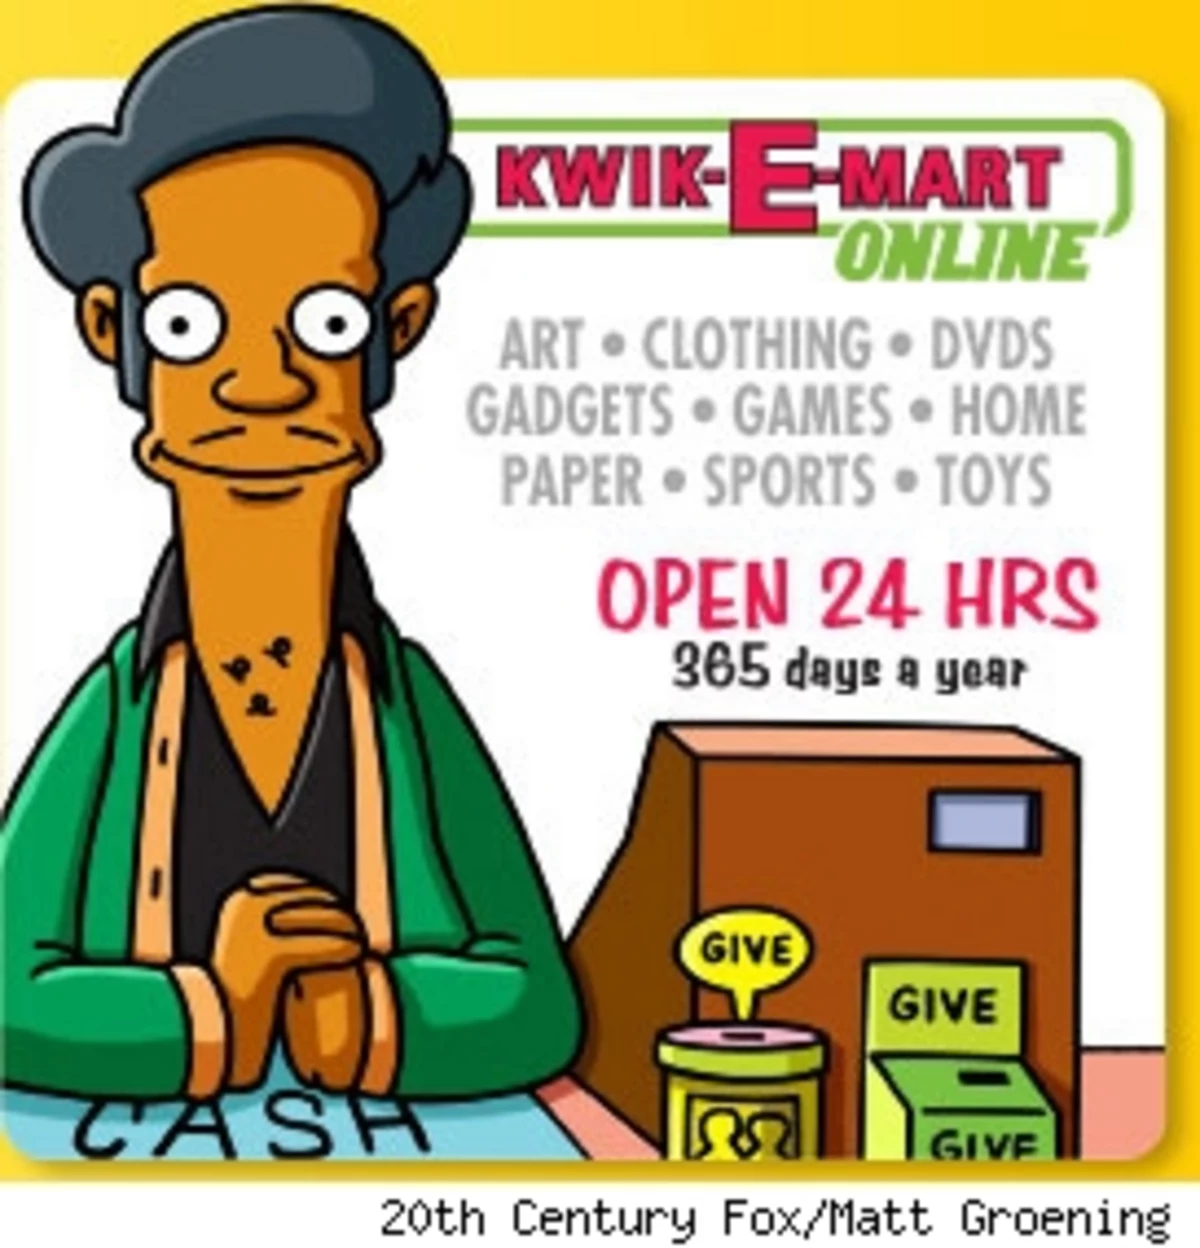 Check Out a Kwik E Mart Near You For An Exclusive Simpsons Comic